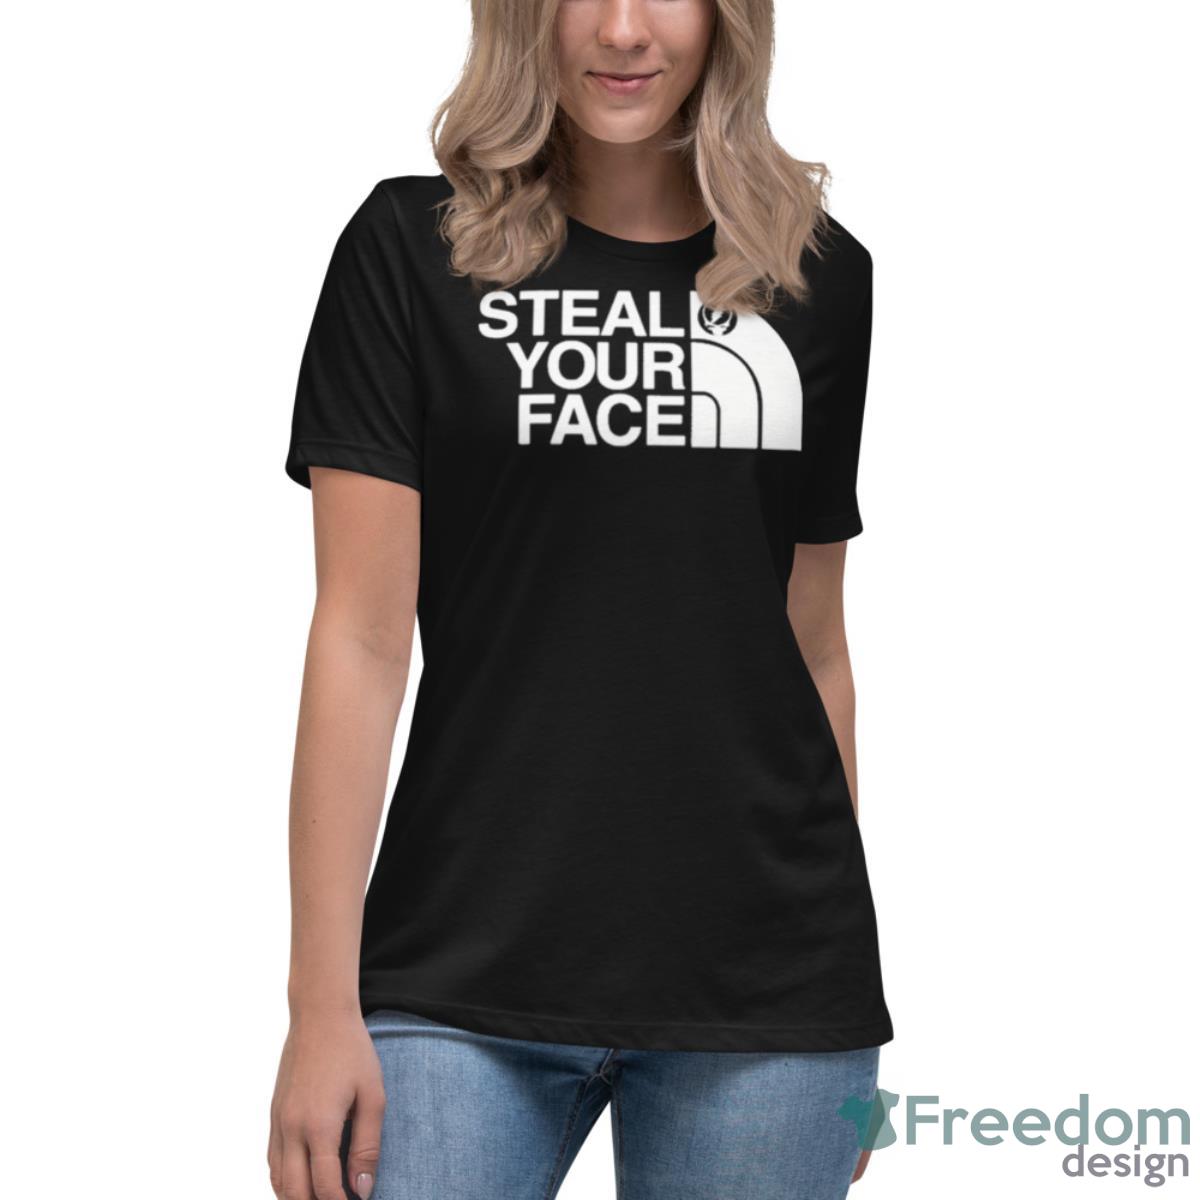 Andy Cohen Steal Your Face Shirt